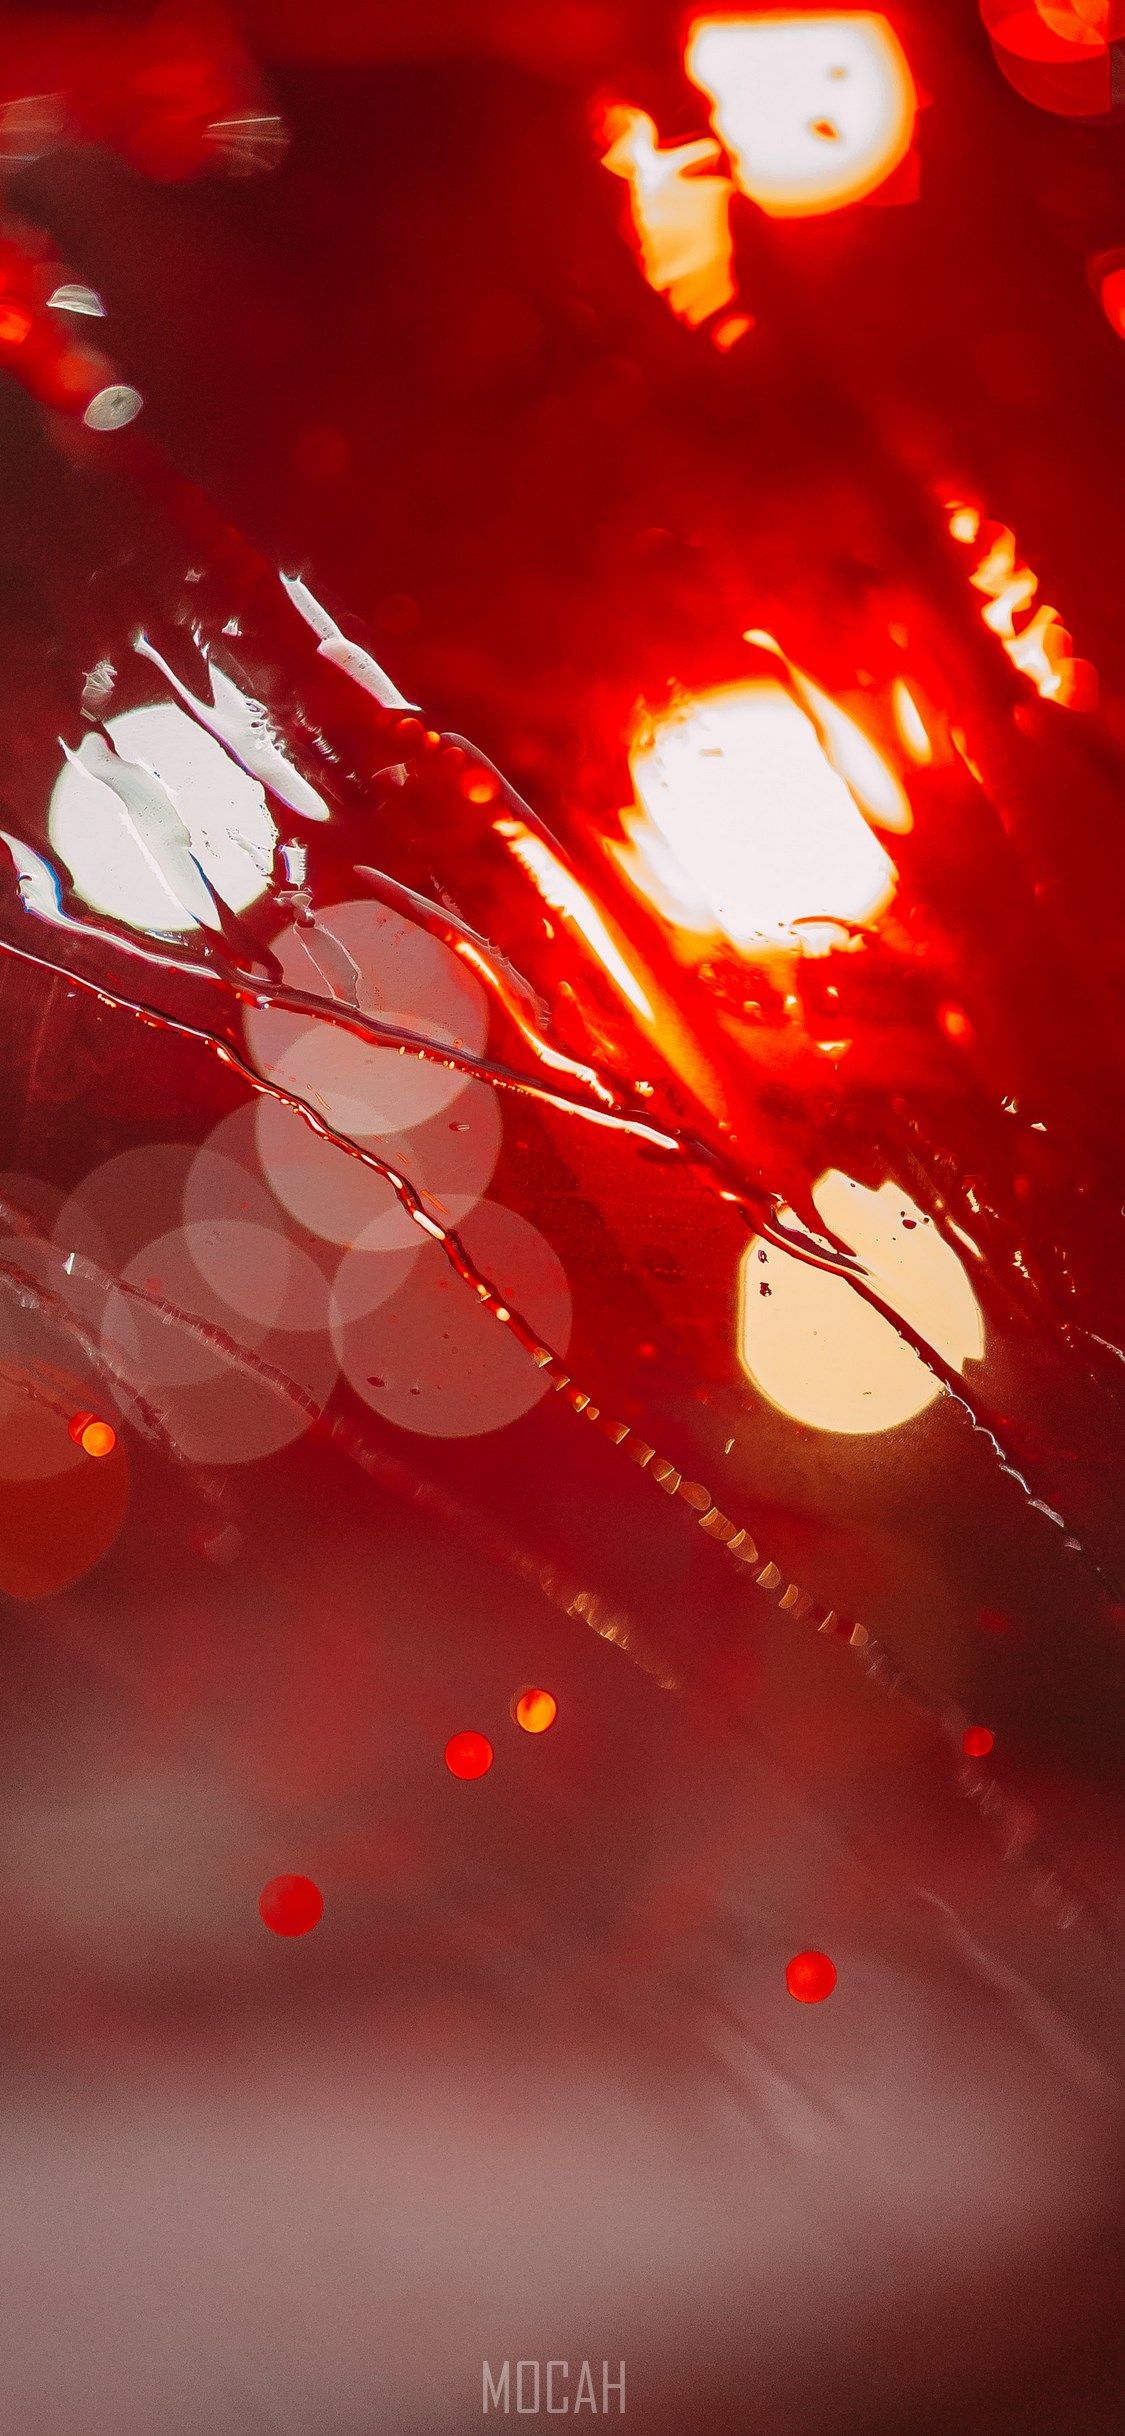 A red car is seen through a rain-streaked windshield. - Blurry, light red